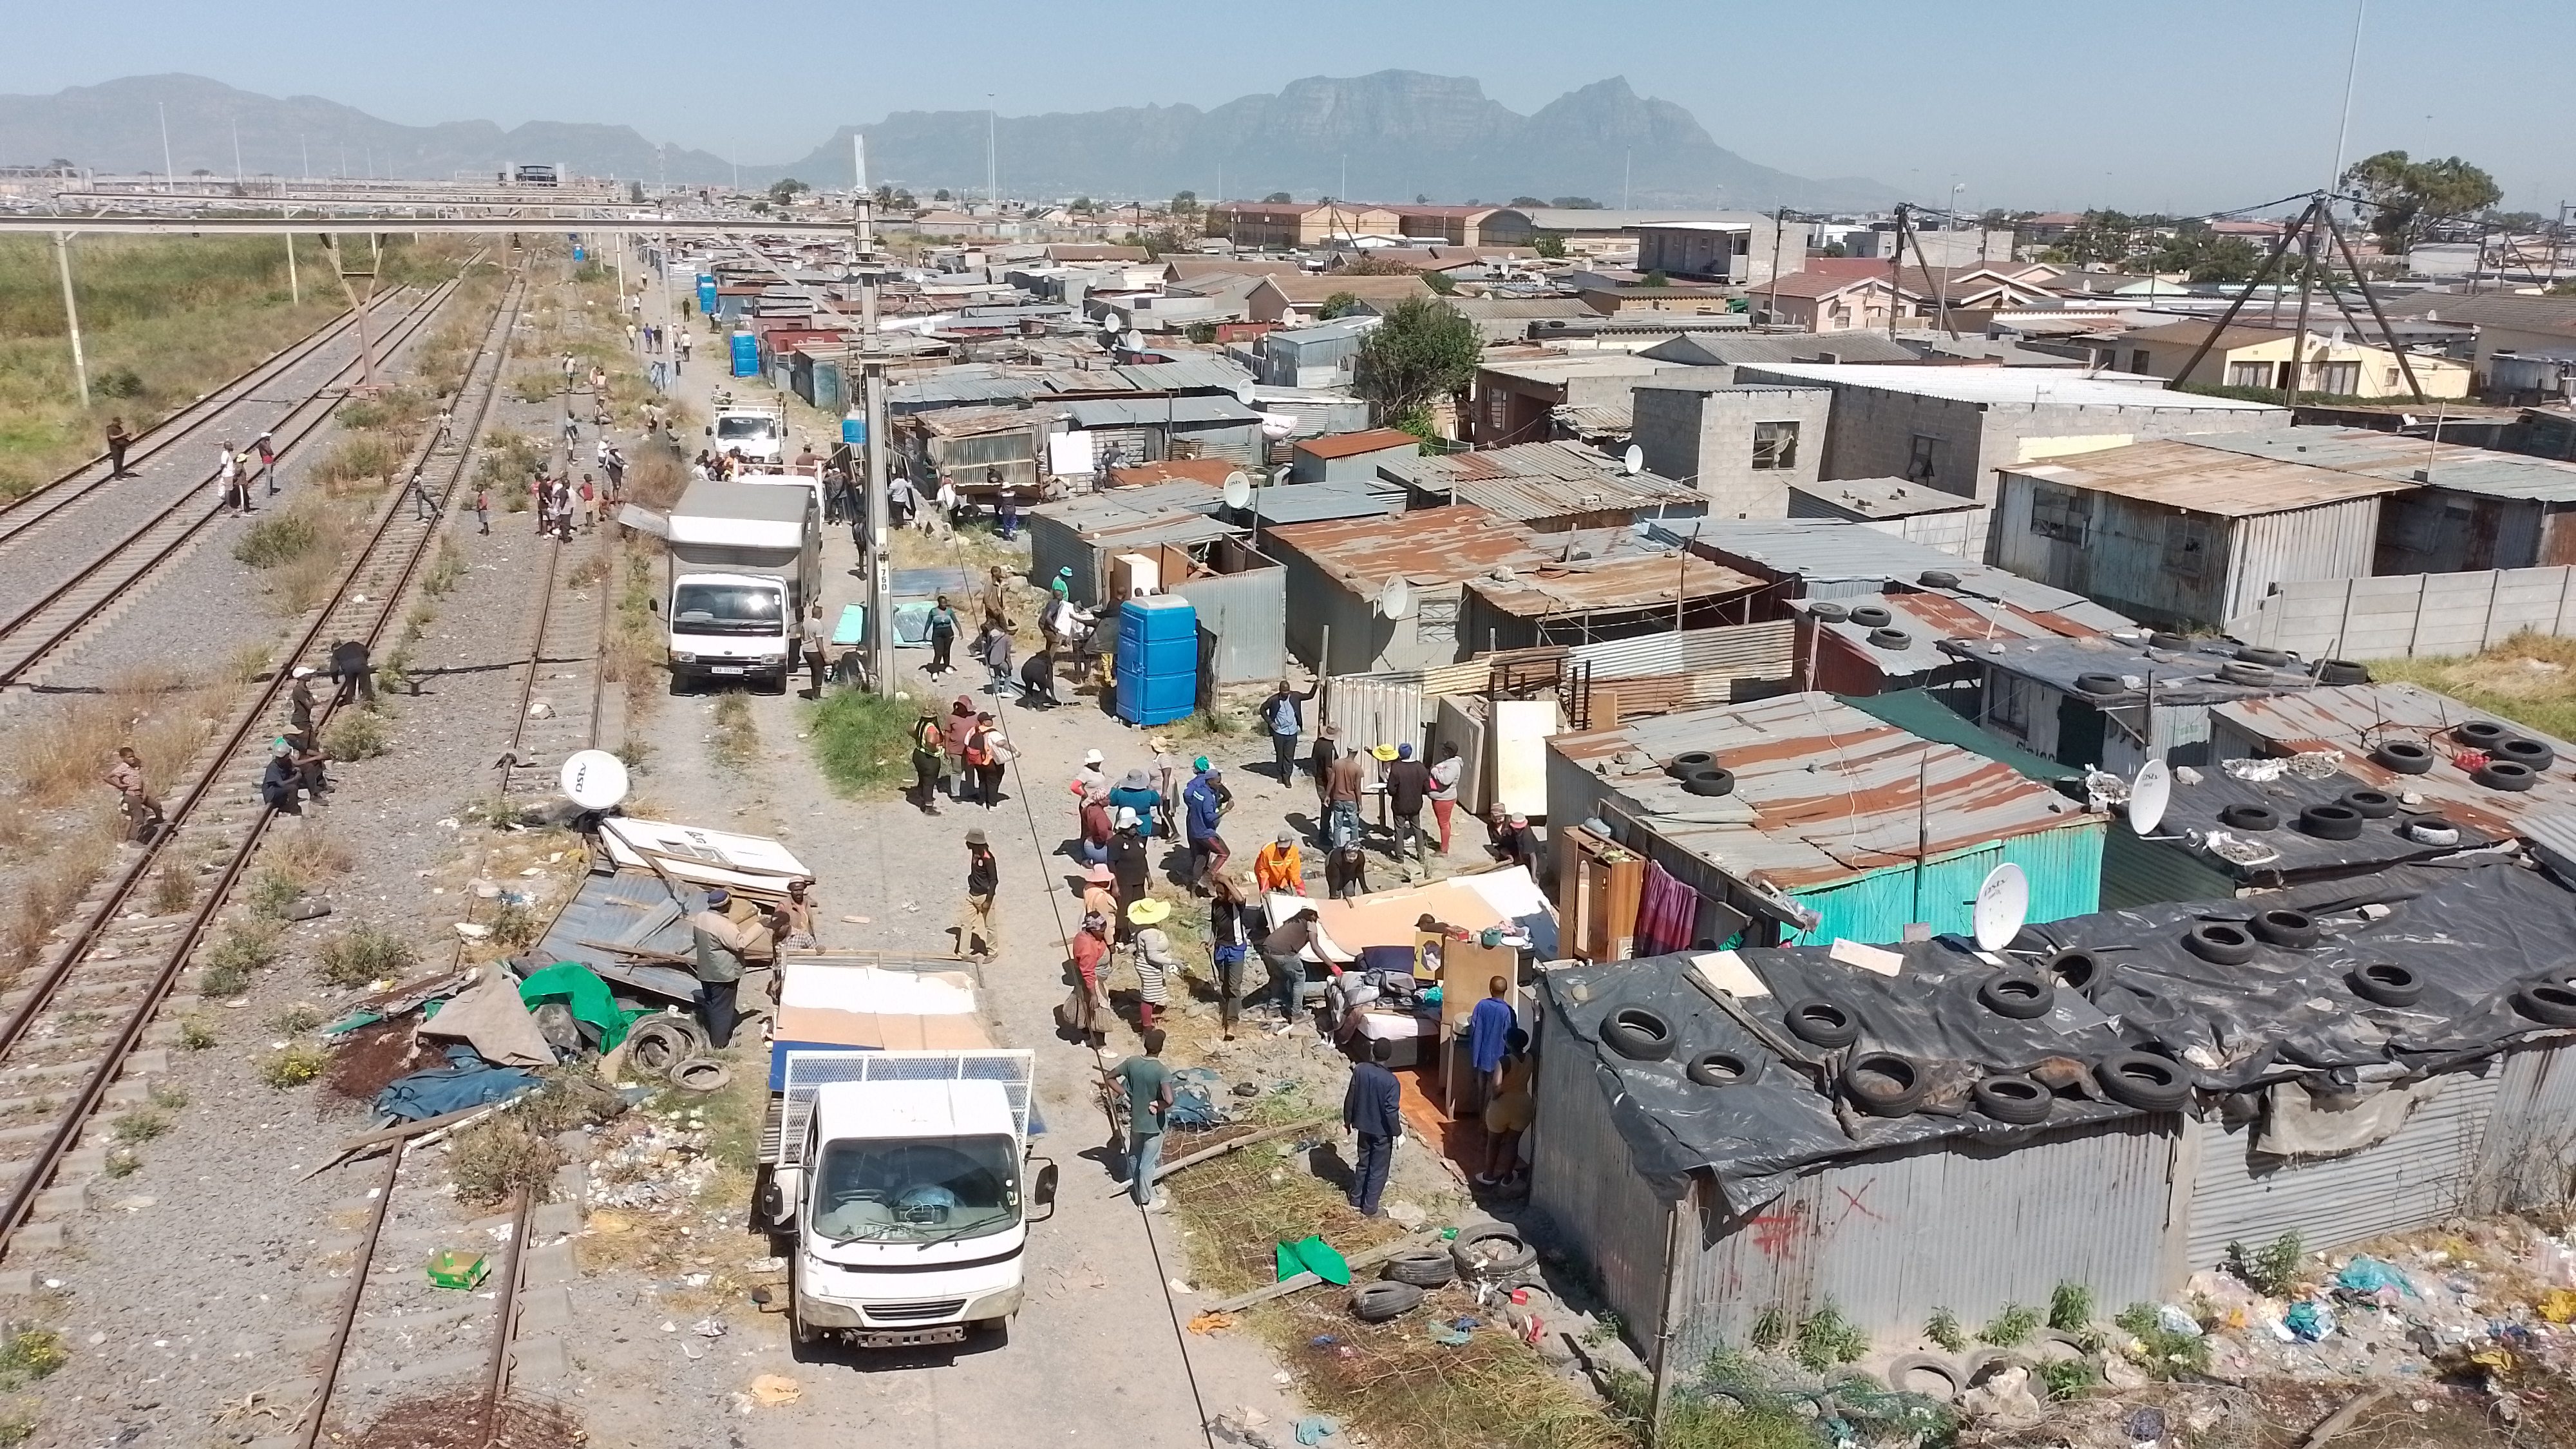 Metrorail shack dwellers moved, but to a place without toilets or water